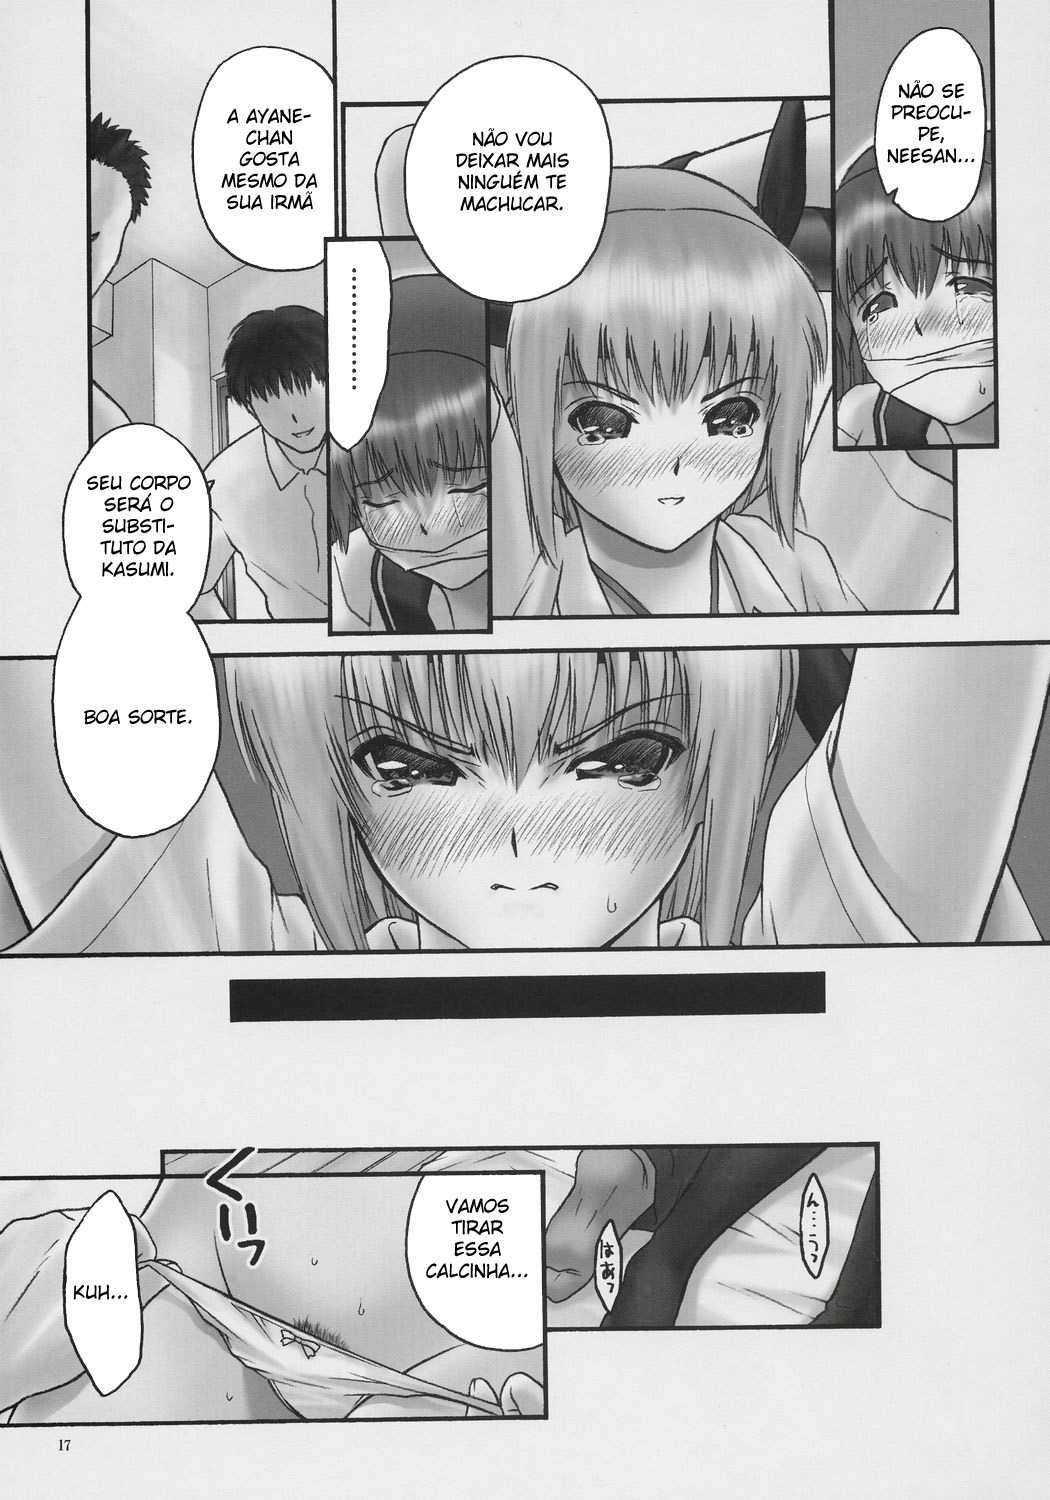 (C71) [Hellabunna (Iruma Kamiri)] Rei Chapter 03: Involve Slave to the Grind (Dead or Alive) [Portuguese-BR] (C71) [へらぶな (いるまかみり)] 隷 CHAPTER 03:INVOLVE slave to the grind (デッド・オア・アライヴ) [ポルトガル翻訳]